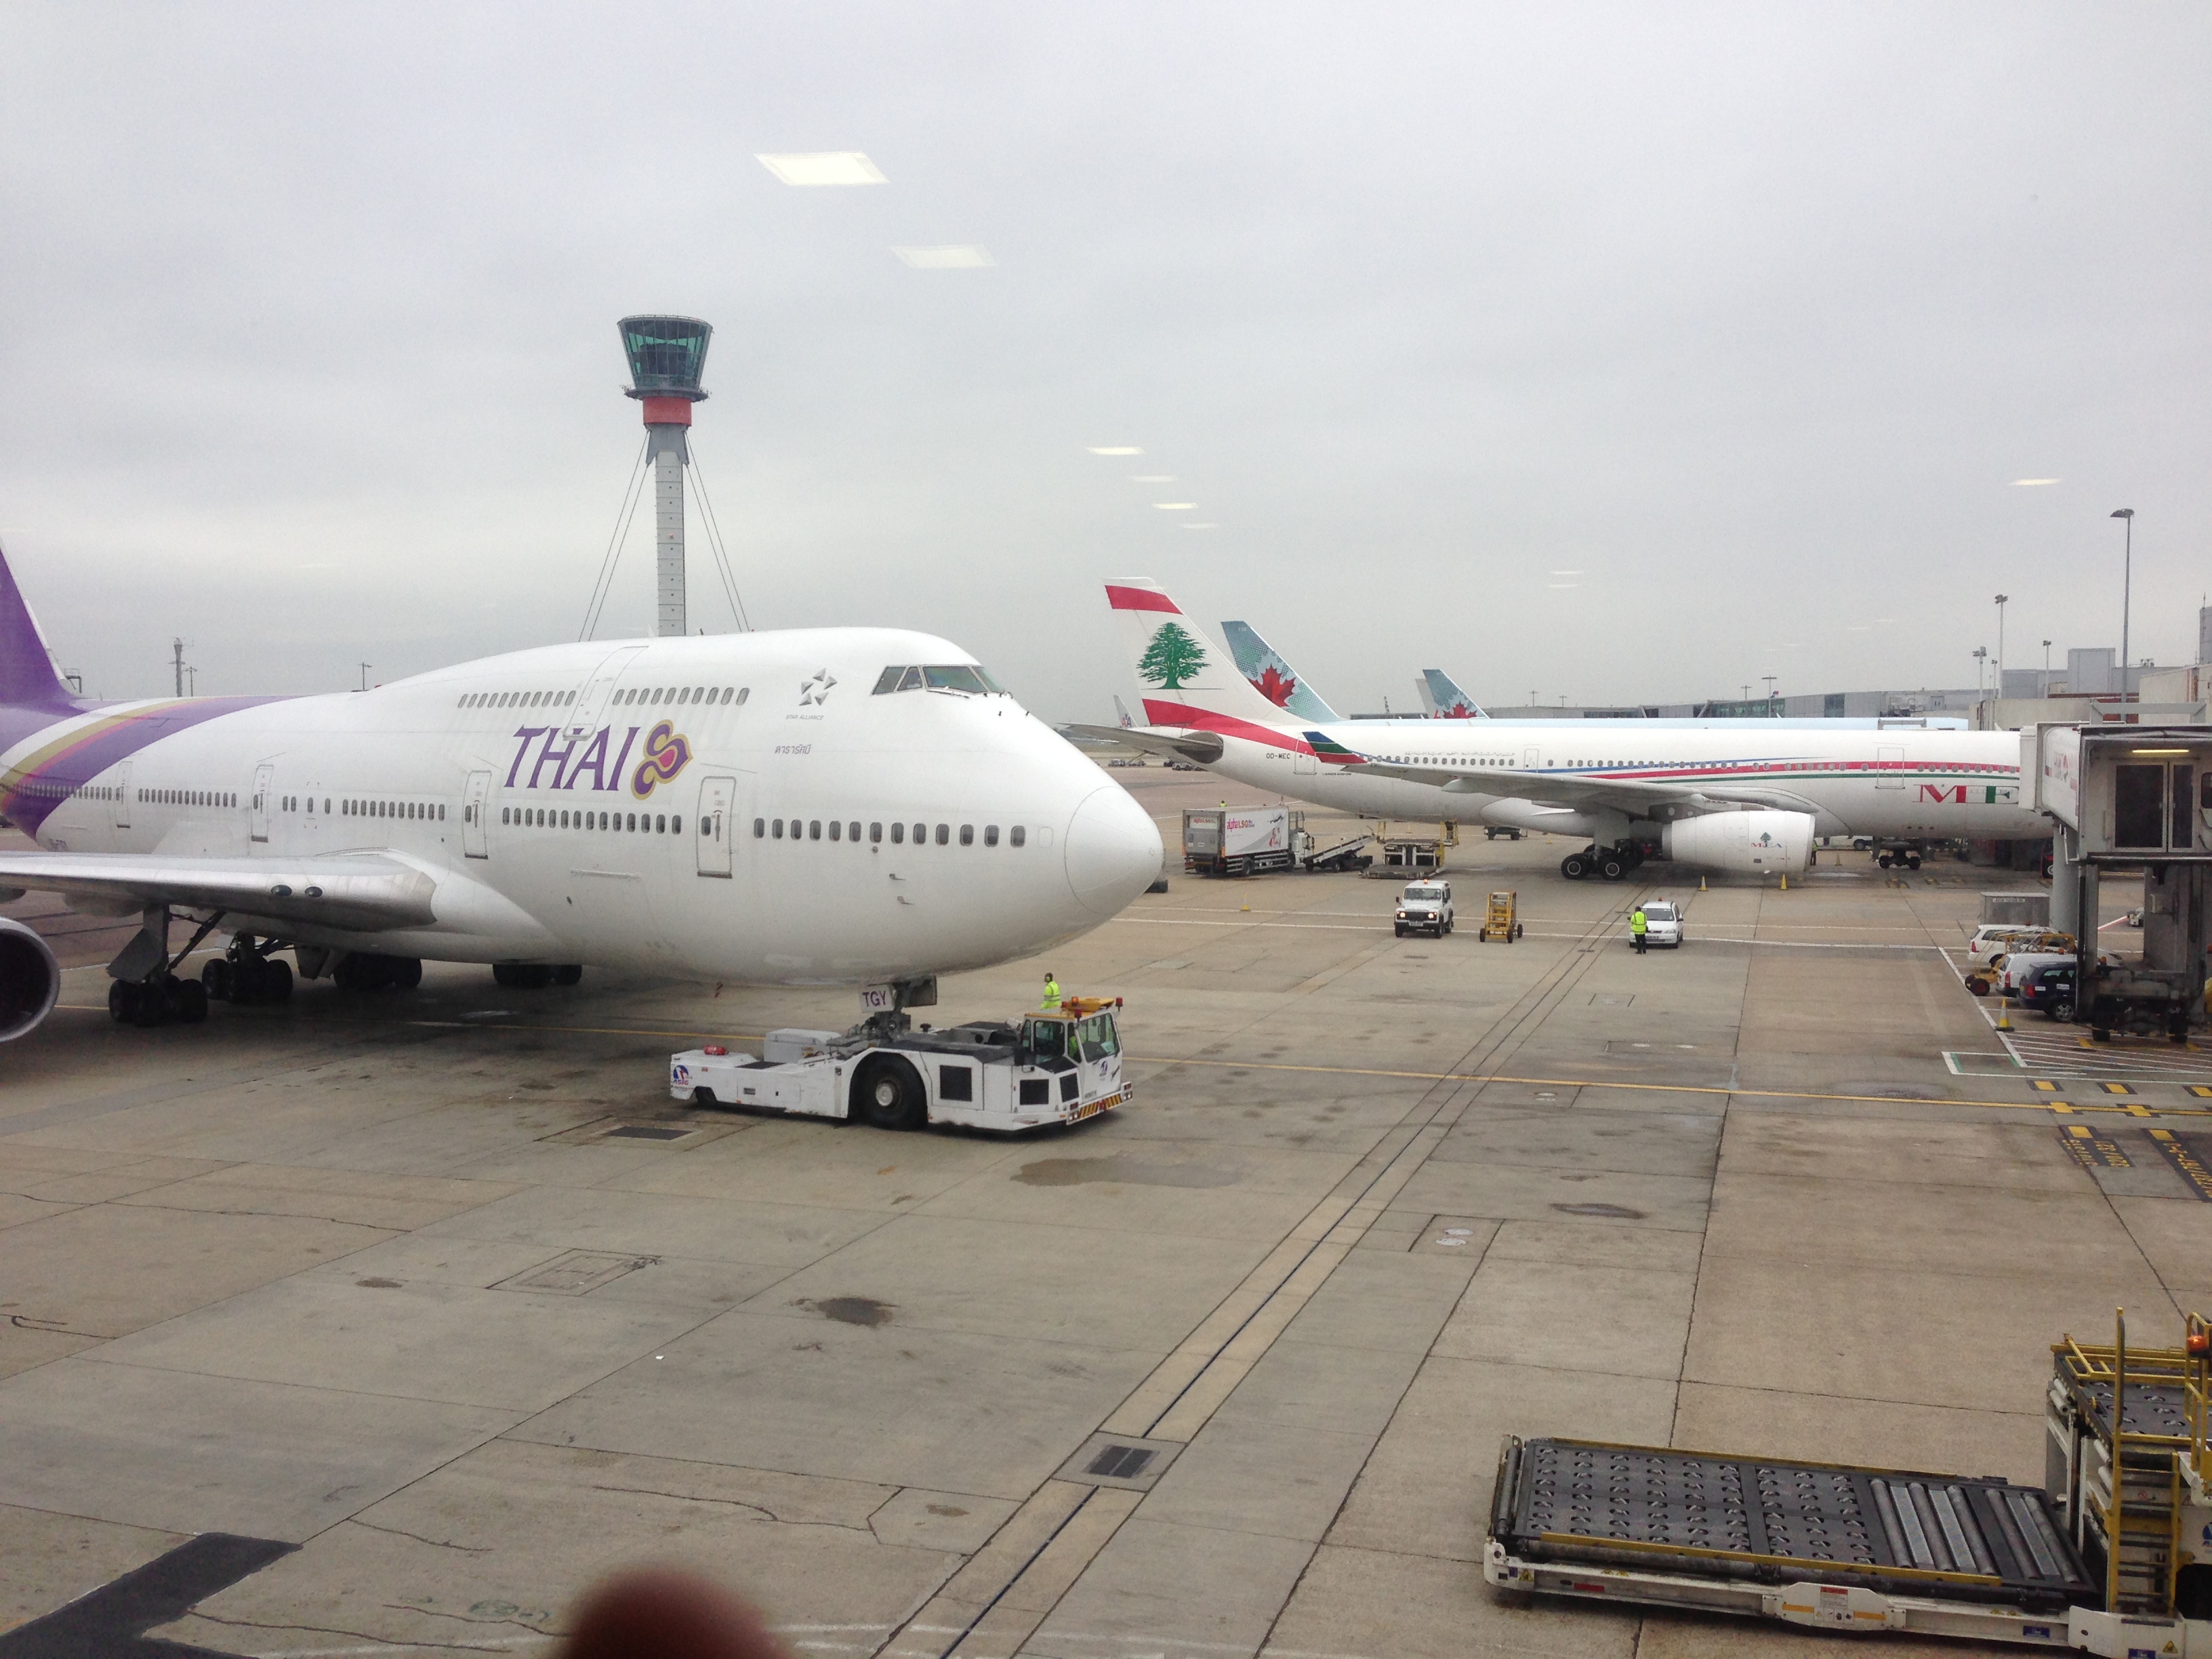 81 Hours In Europe:  Heathrow T3 And American Airlines Flagship Lounge